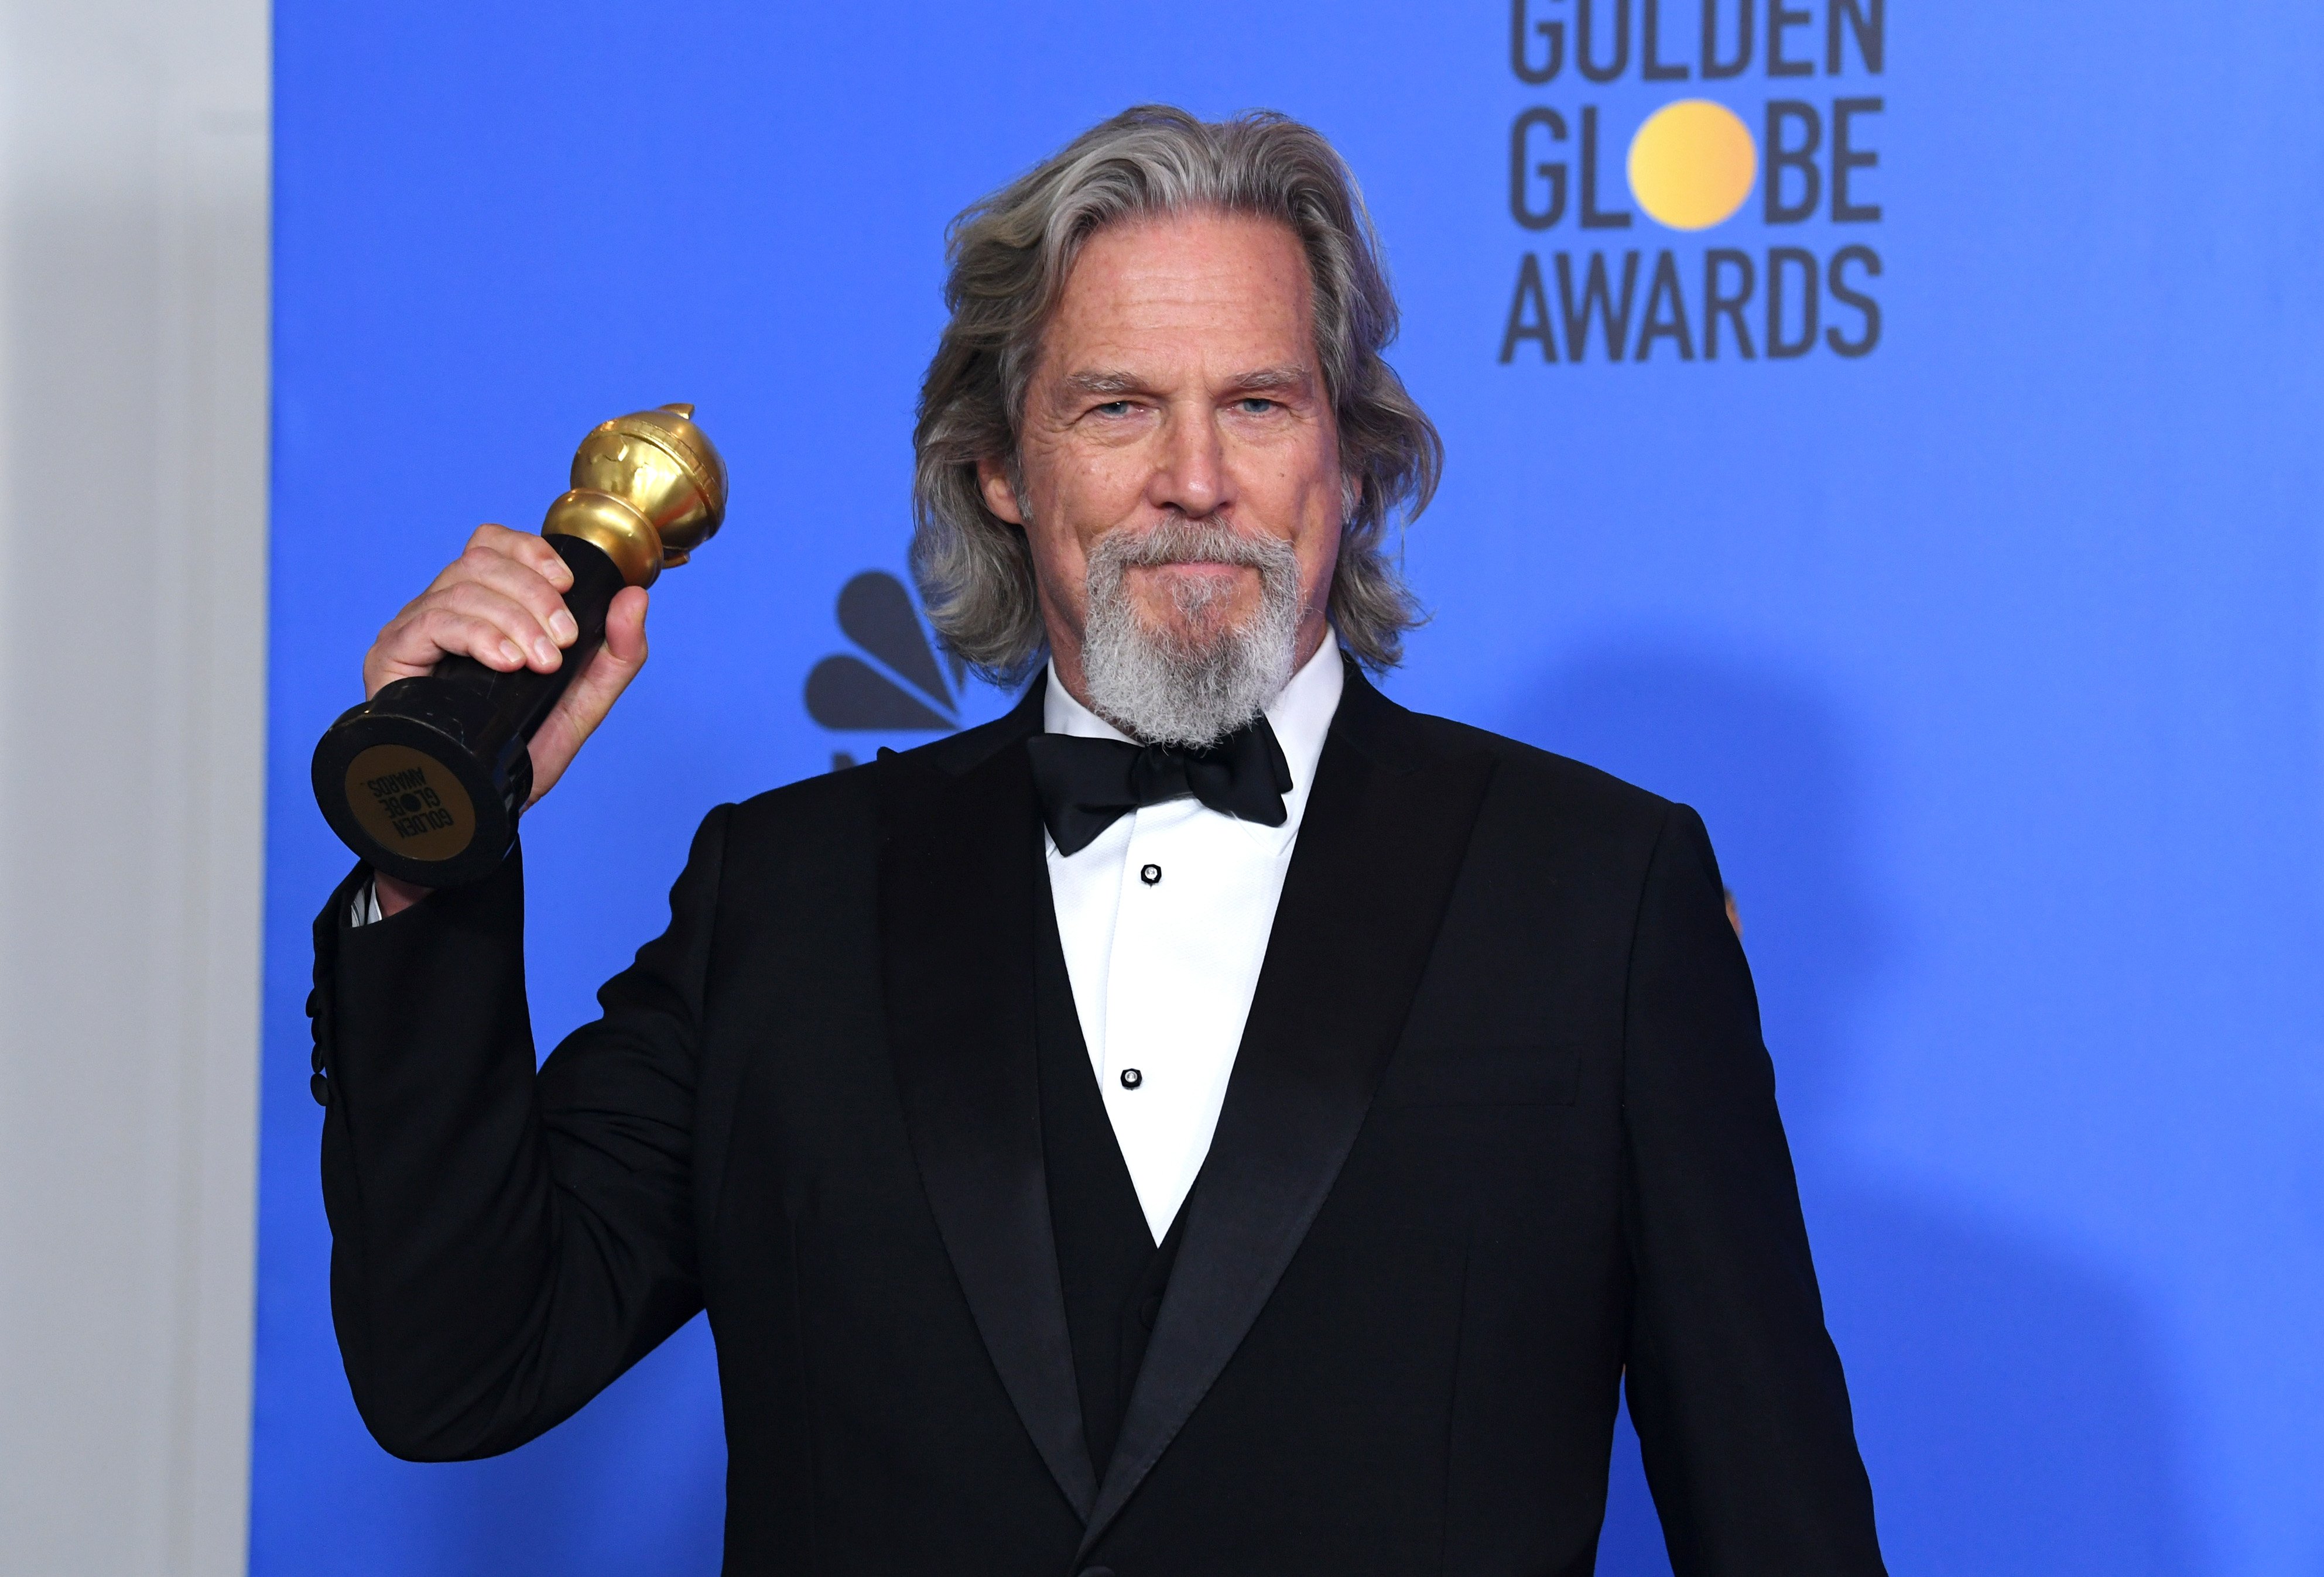 Jeff Bridges poses in the press room during the 76th Annual Golden Globe Awards at The Beverly Hilton Hotel on January 6, 2019 in Beverly Hills, California | Source: Getty Images